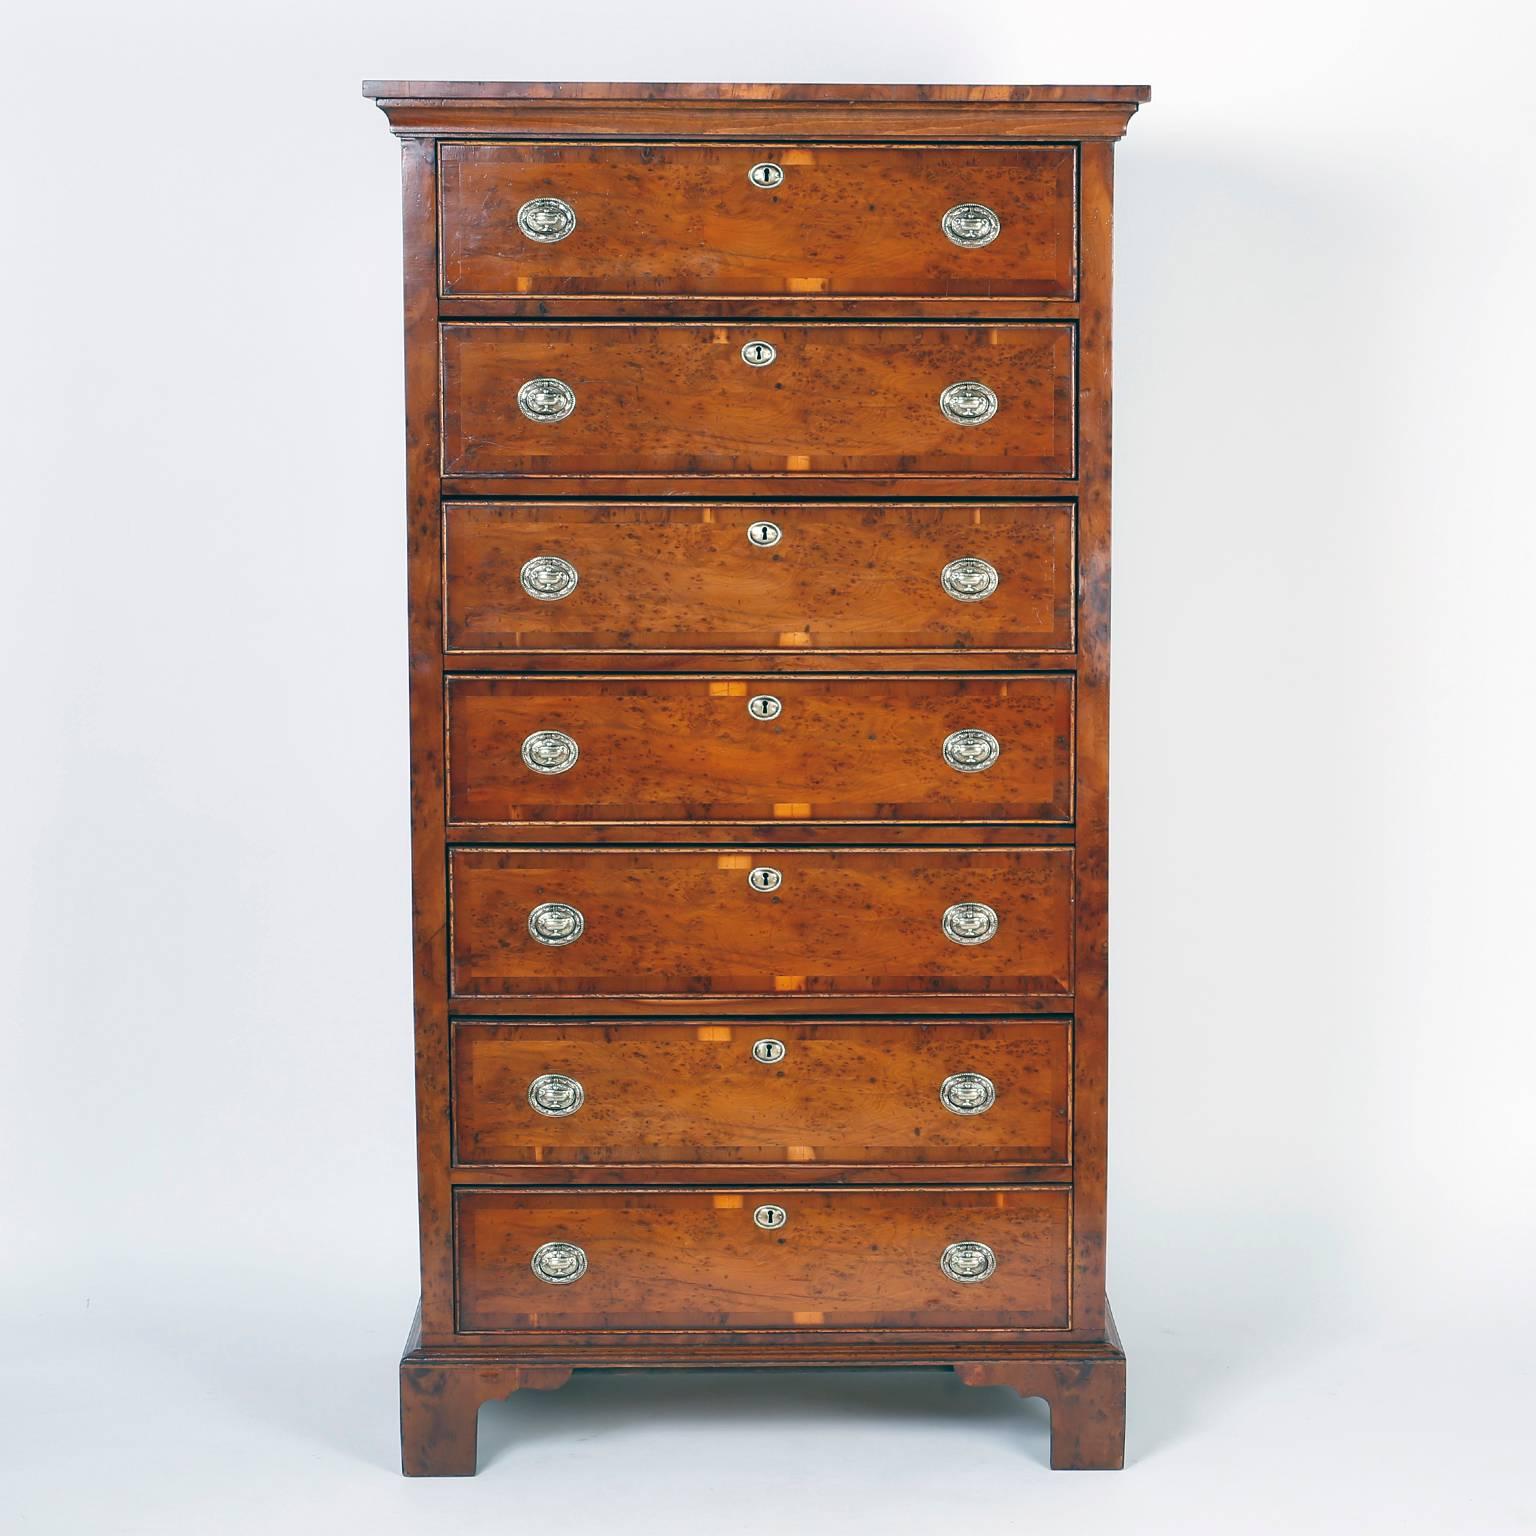 Handsome English gentlemen's chest with seven drawers featuring rare
and exotic yew wood veneers, brass hardware panelled sides and outside bracket
feet. The elegant form and dramatic wood grains make this chest an
important find.